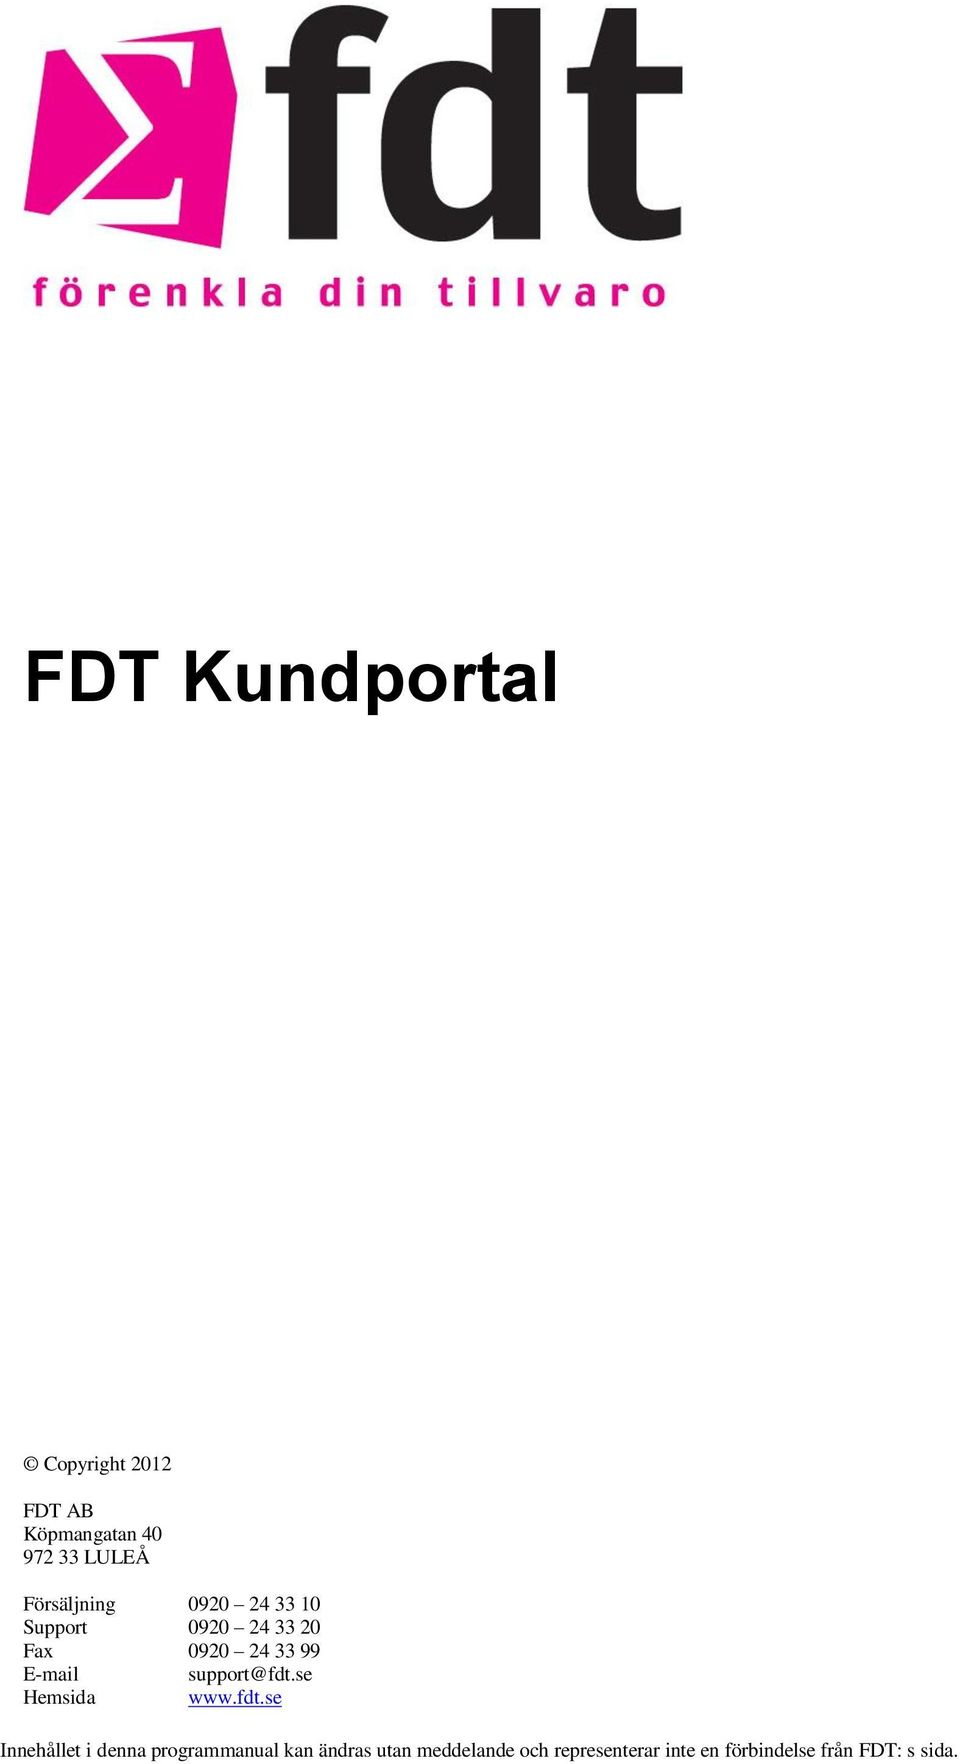 E-mail support@fdt.